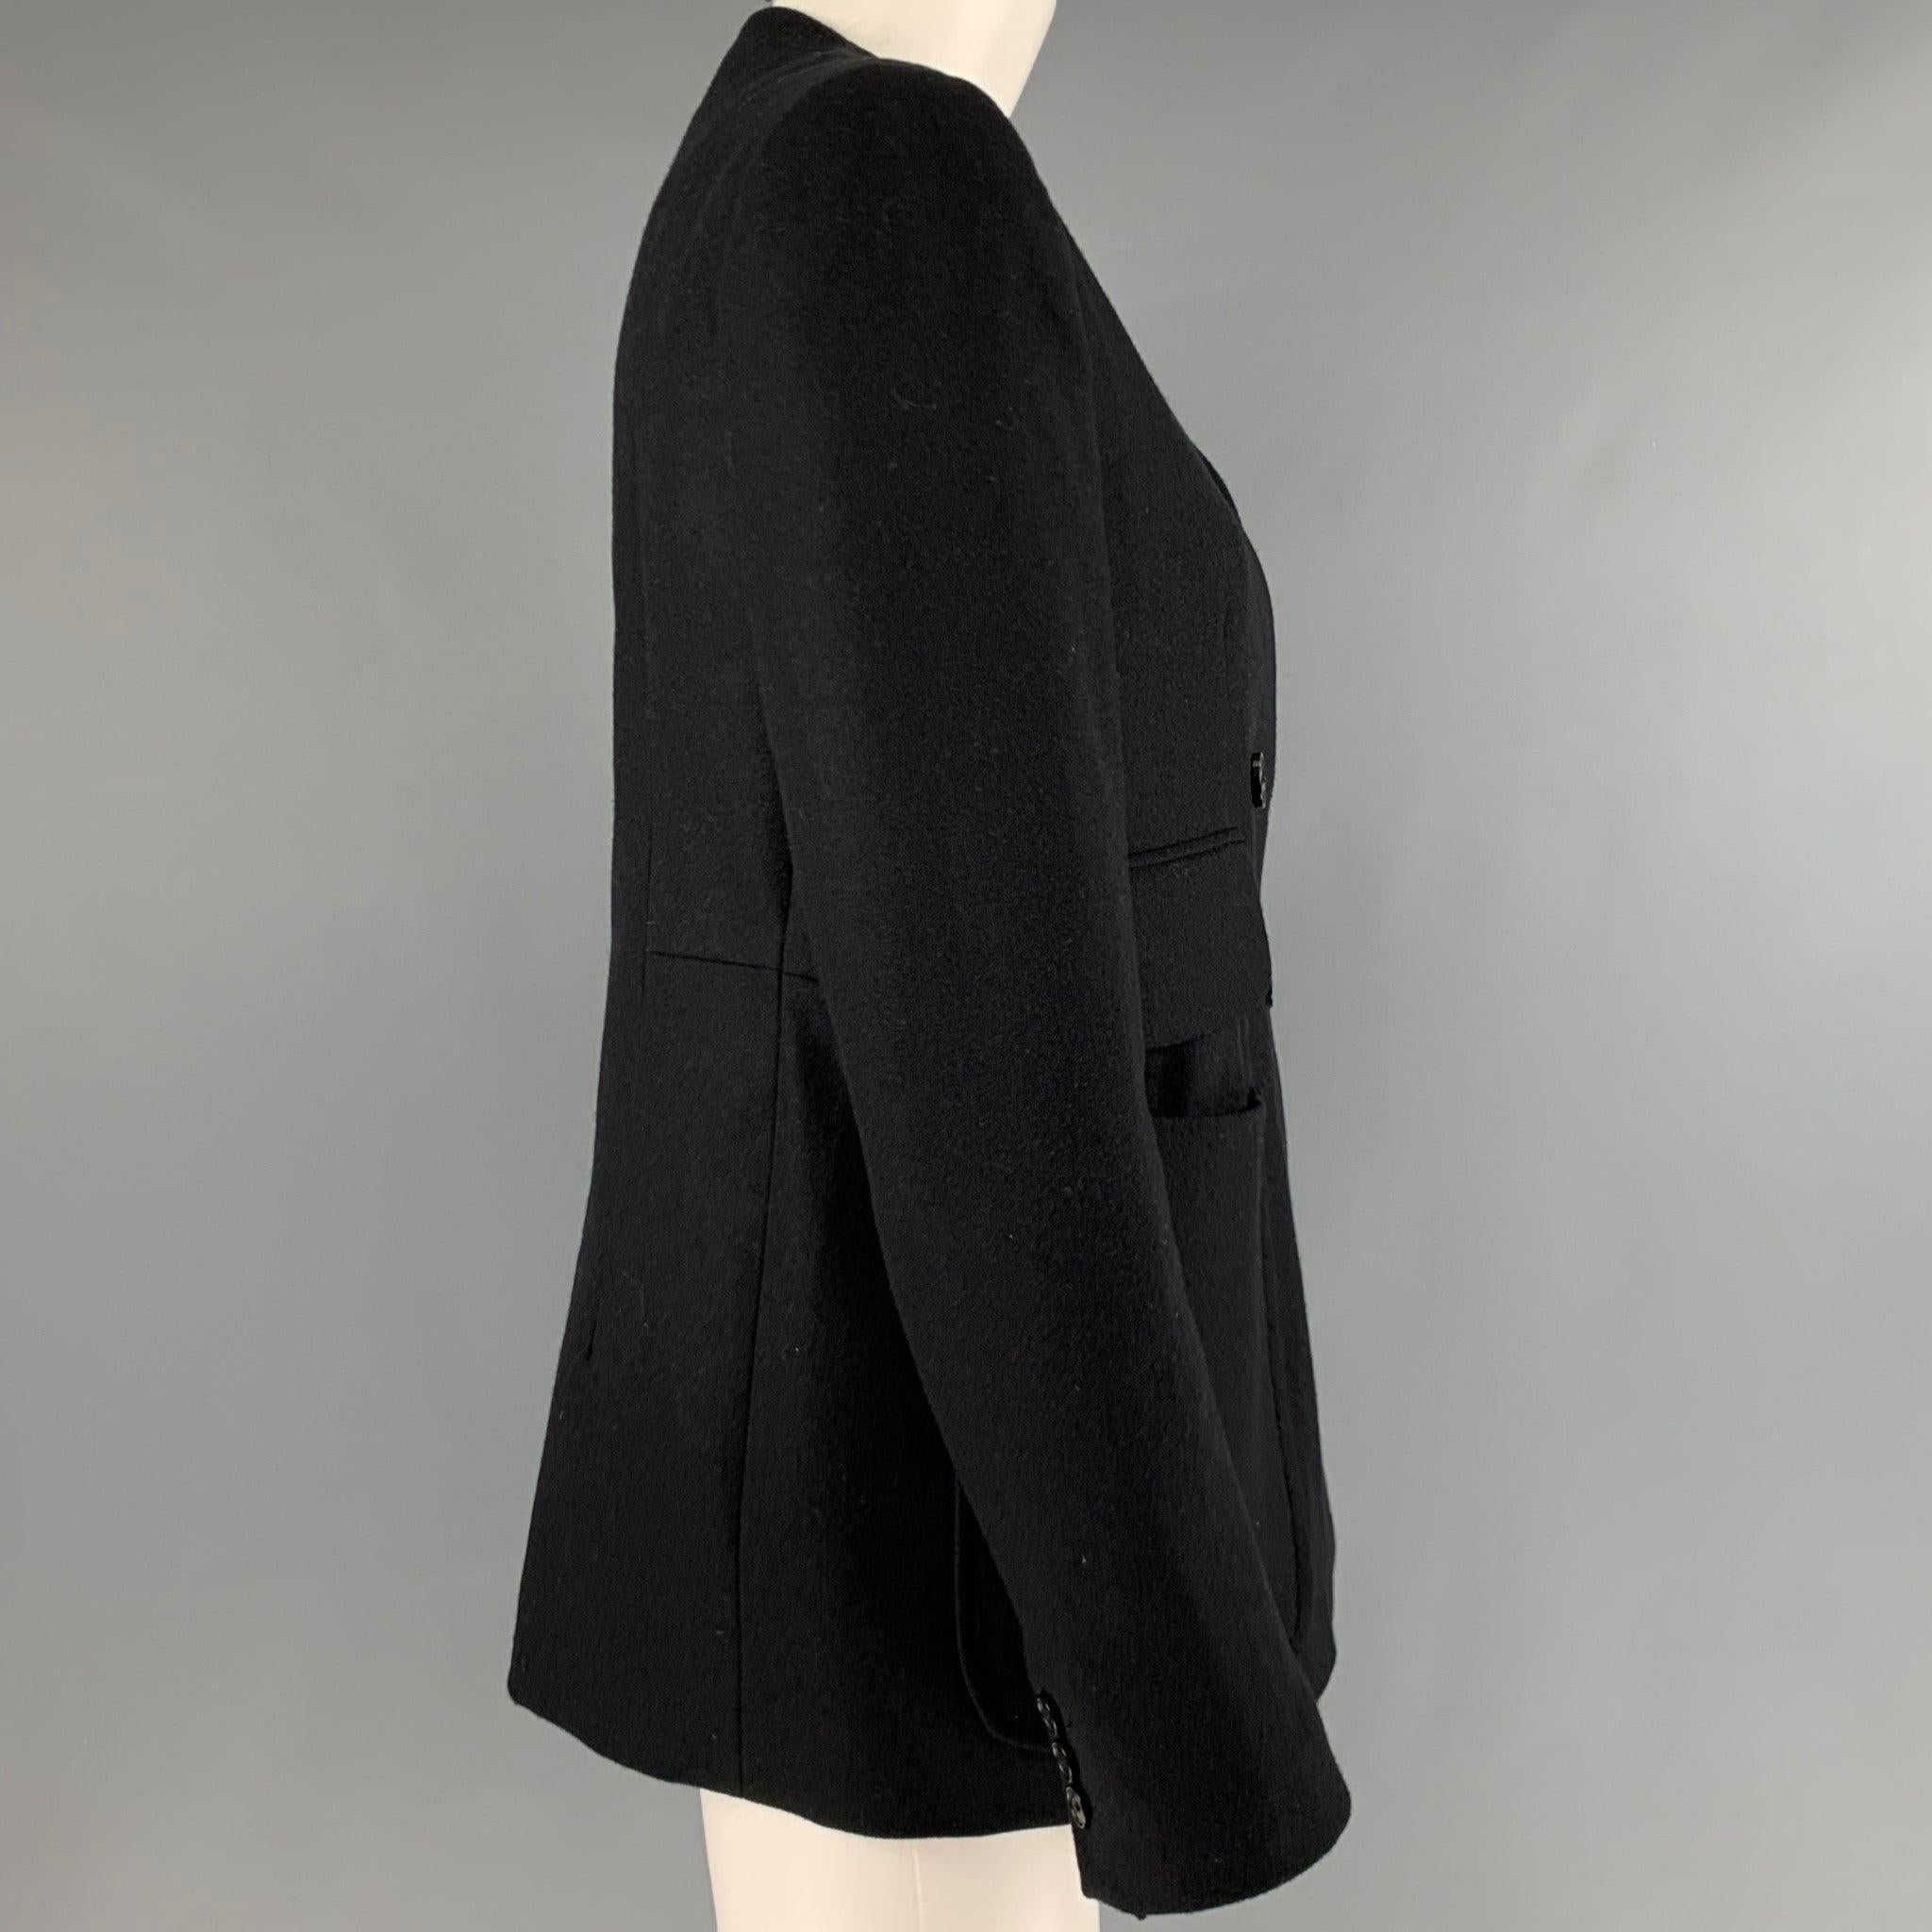 CARVEN jacket
in a black wool fabric featuring a double breasted style, large pockets, and a single button closure. Made in France.Excellent Pre-Owned Condition. 

Marked:   42 

Measurements: 
 
Shoulder: 16 inches Bust: 37 inches Sleeve: 24.5